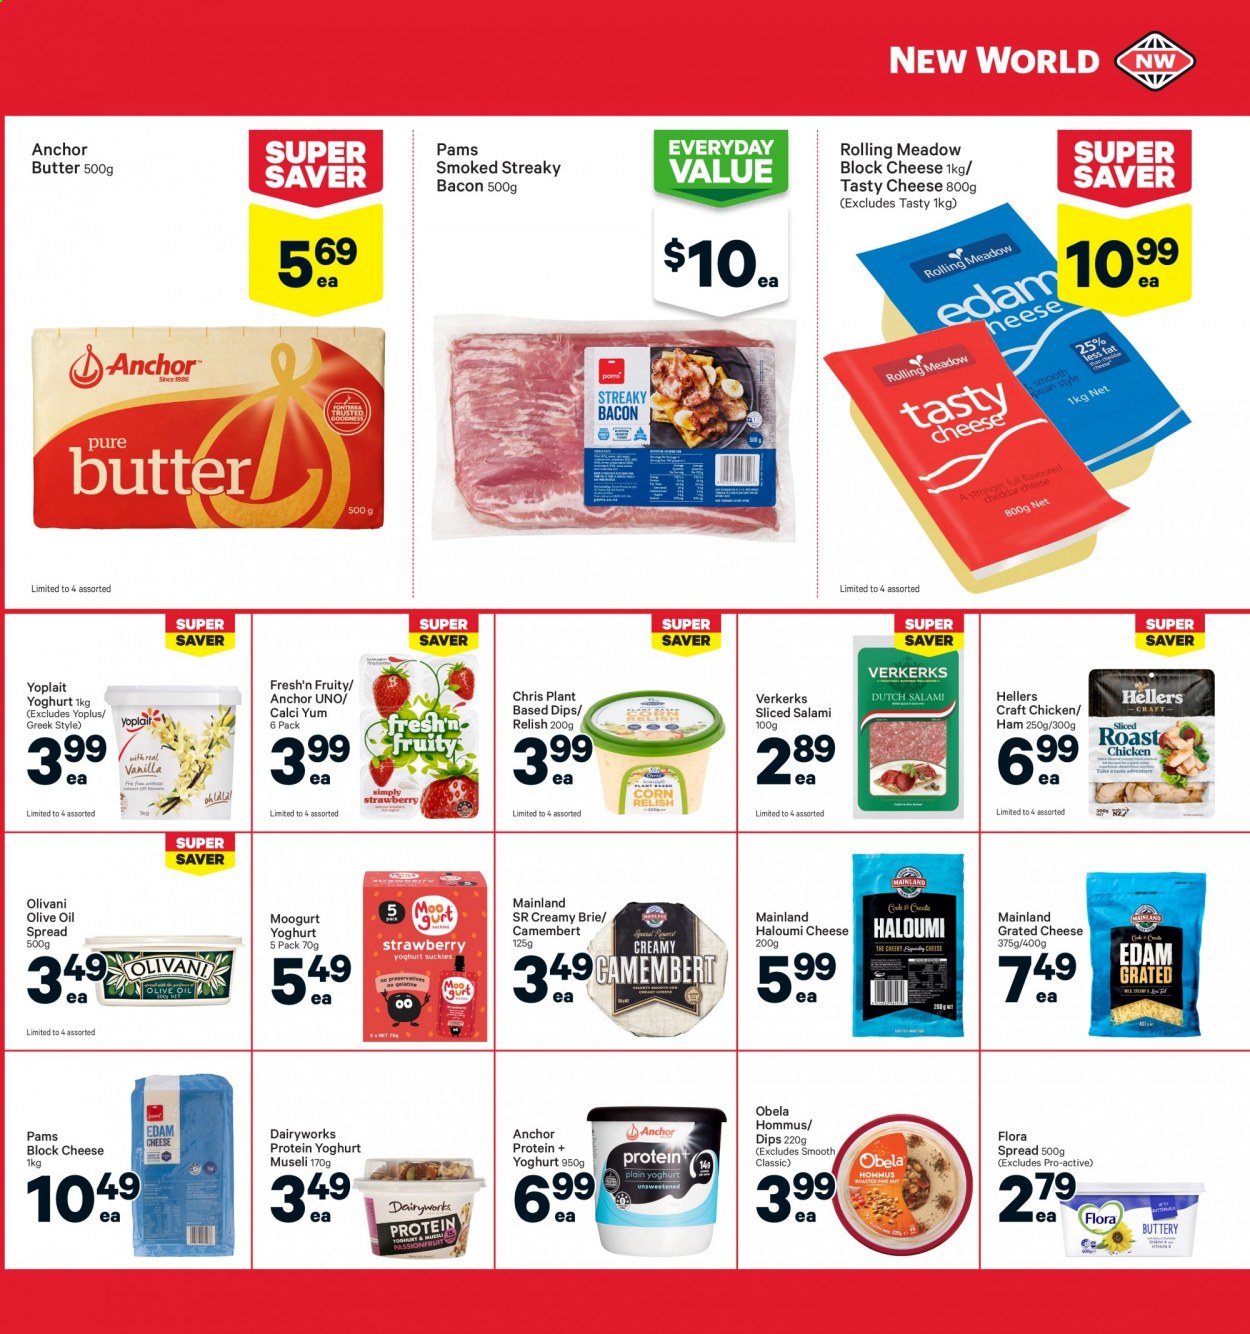 thumbnail - New World mailer - 21.06.2021 - 27.06.2021 - Sales products - bacon, salami, ham, streaky bacon, hummus, Obela, camembert, cheese, brie, grated cheese, yoghurt, Fresh'n Fruity, Yoplait, butter, Flora, Anchor, olive oil, oil. Page 25.